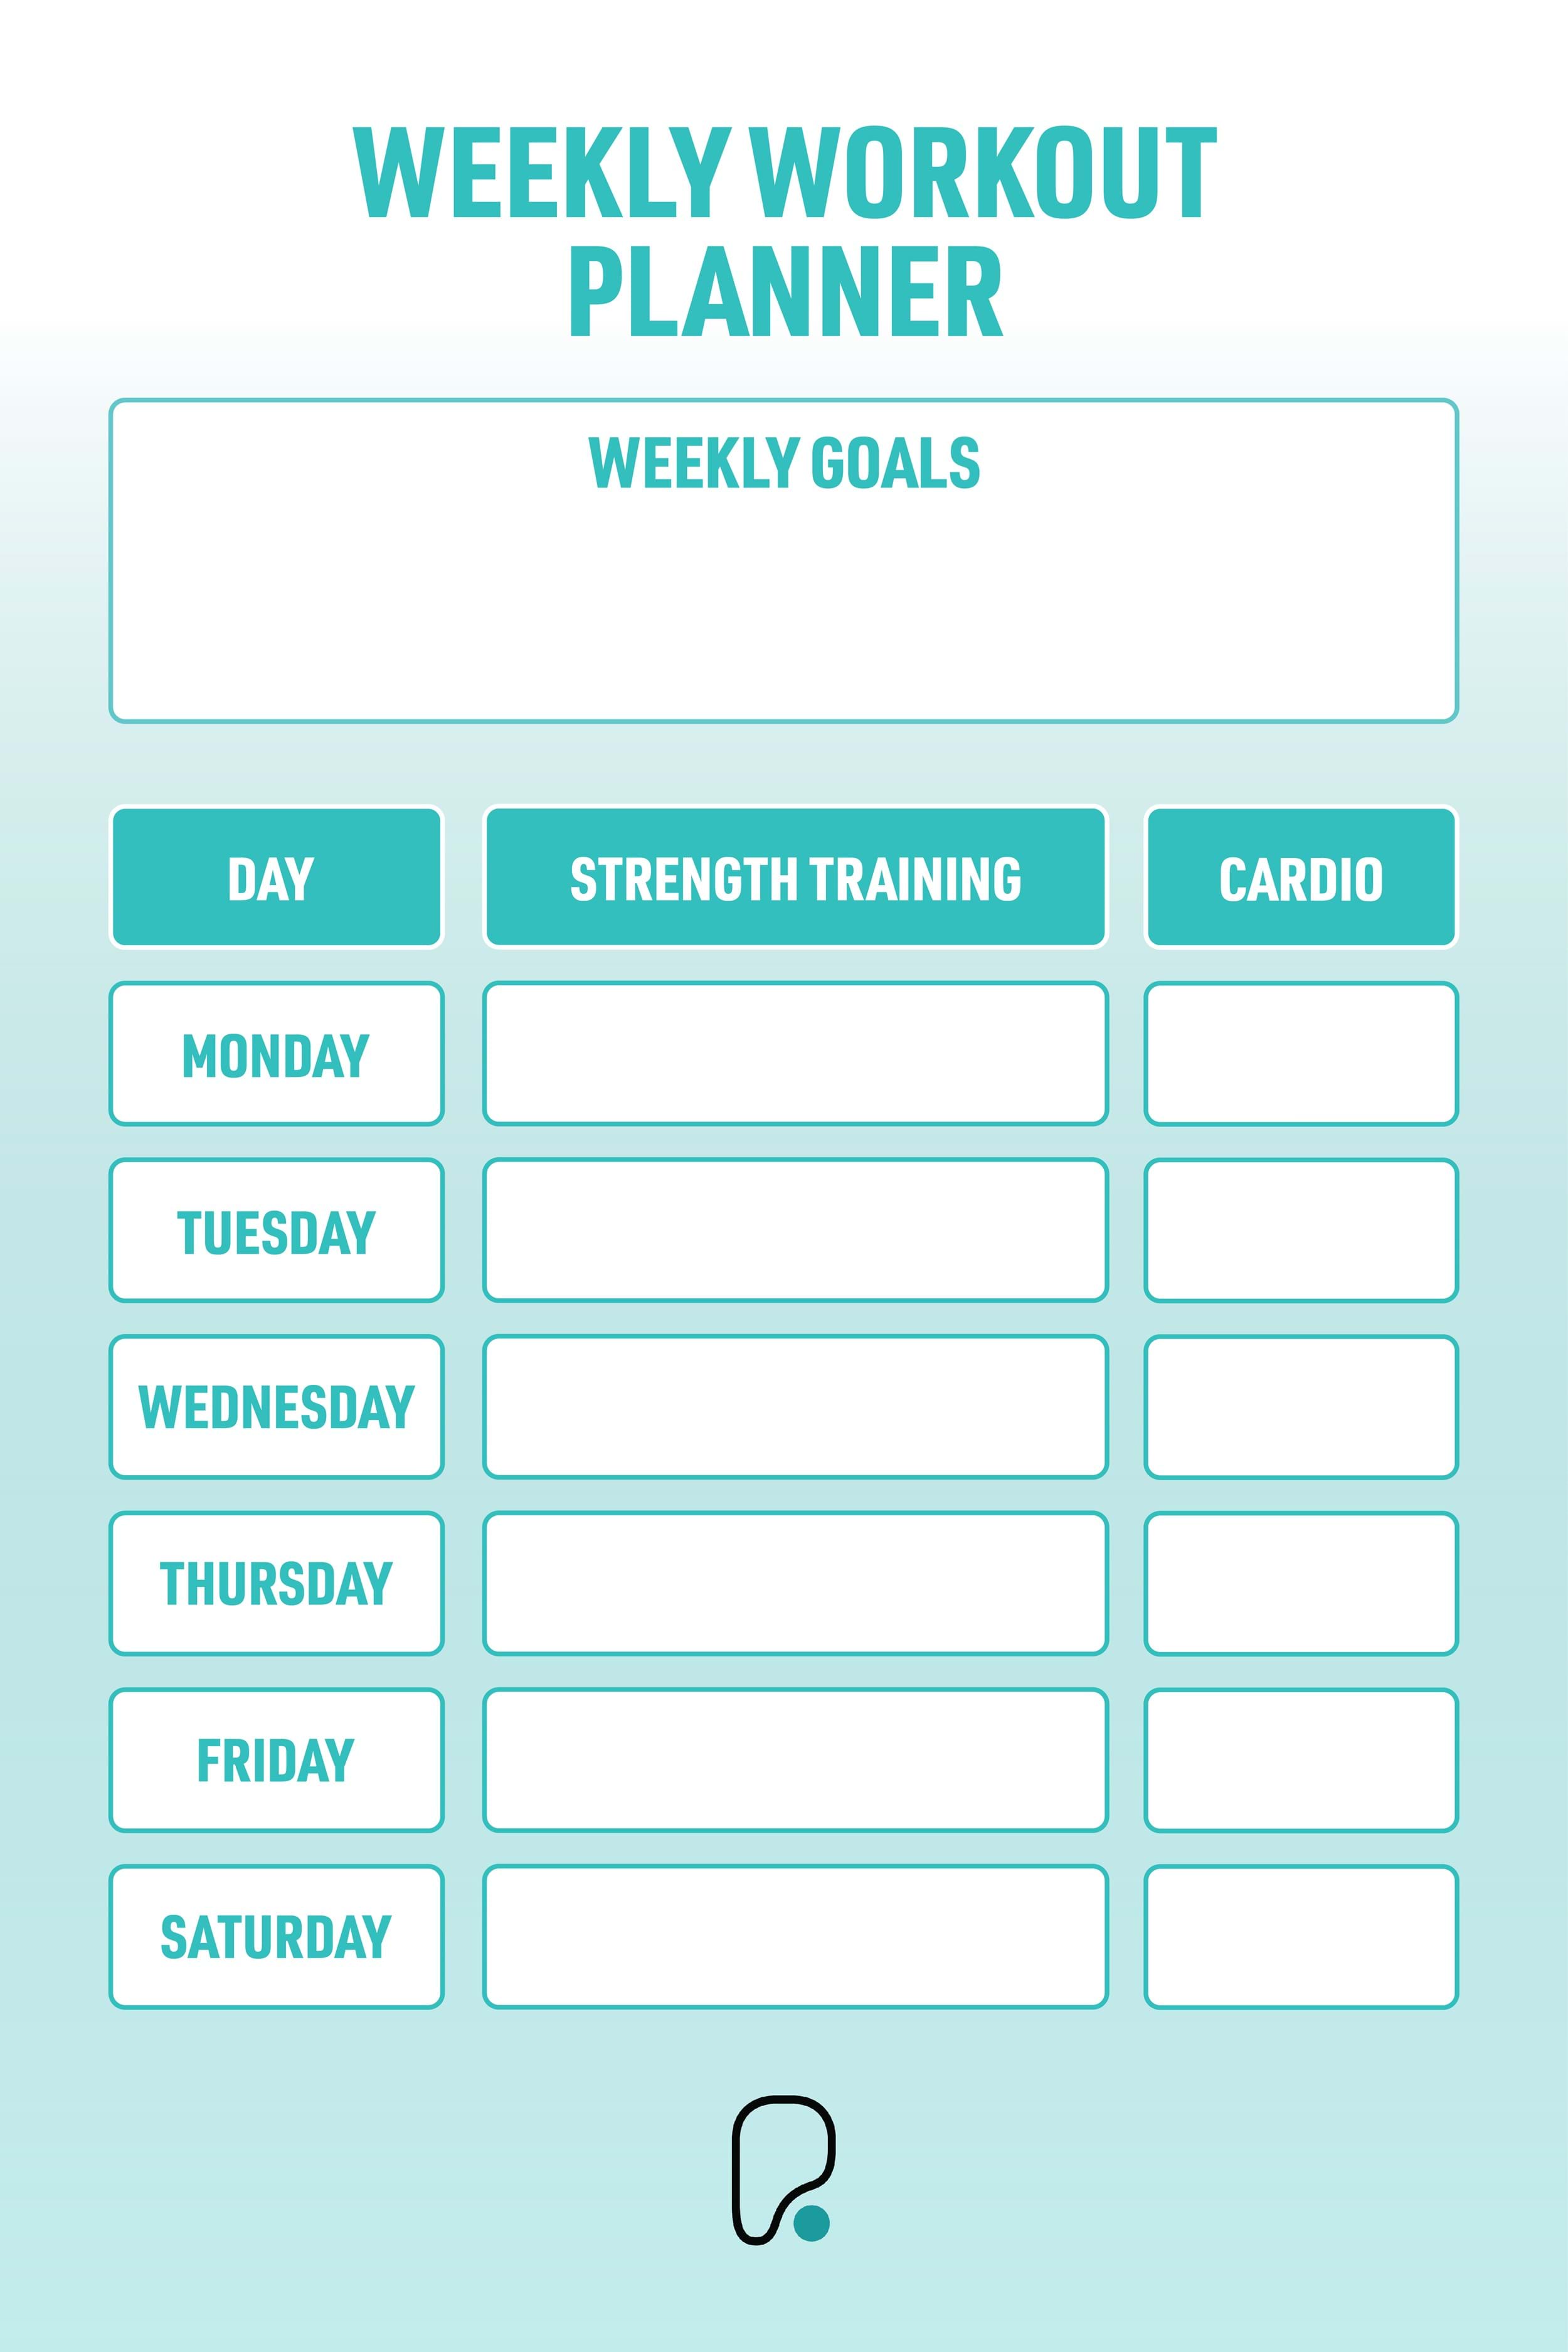 Free exercise program: workout calendar plus a guide to exercise.